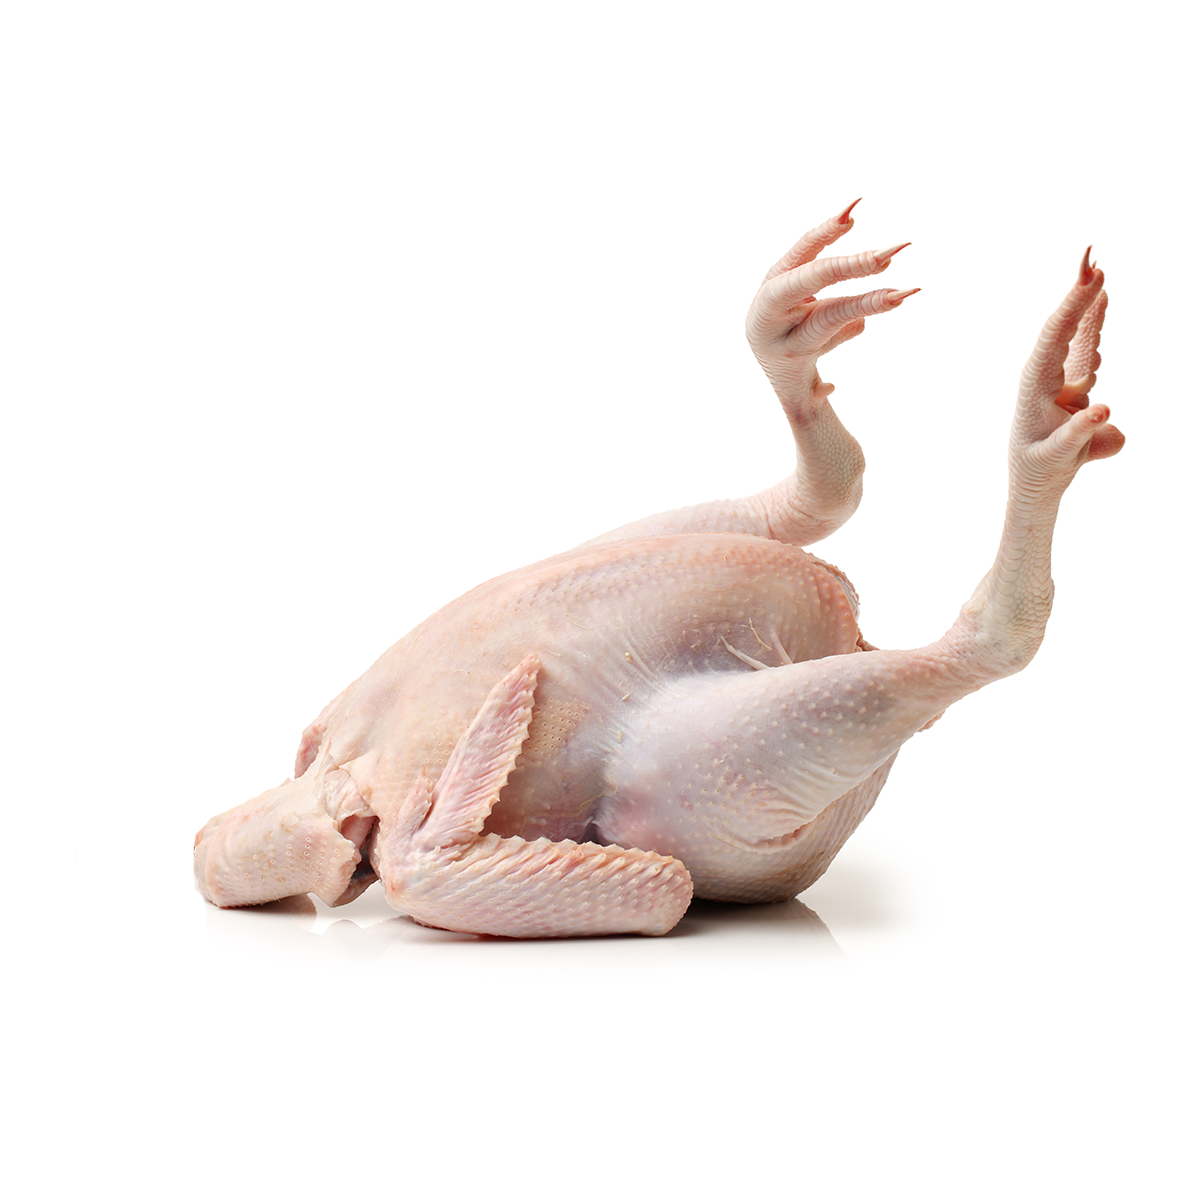 Senat Poultry ABF Halal Whole Chicken Neck and Feet On